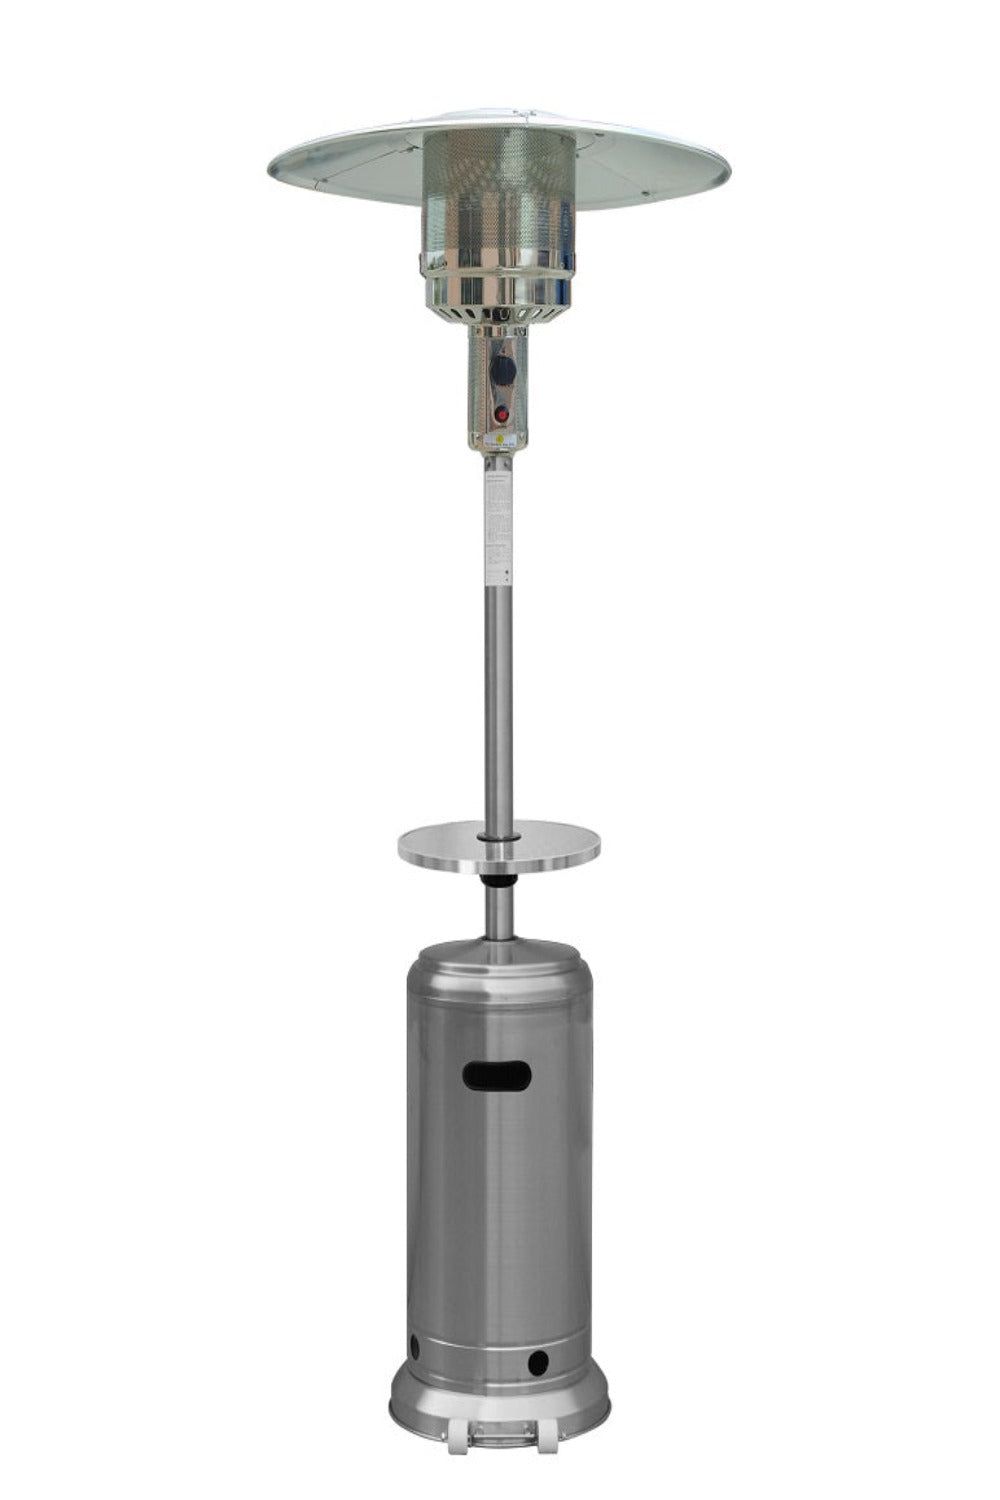 Hiland 87" Tall Outdoor Patio Heater with Table- Stainless Steel- HLDS01-BST- Main View